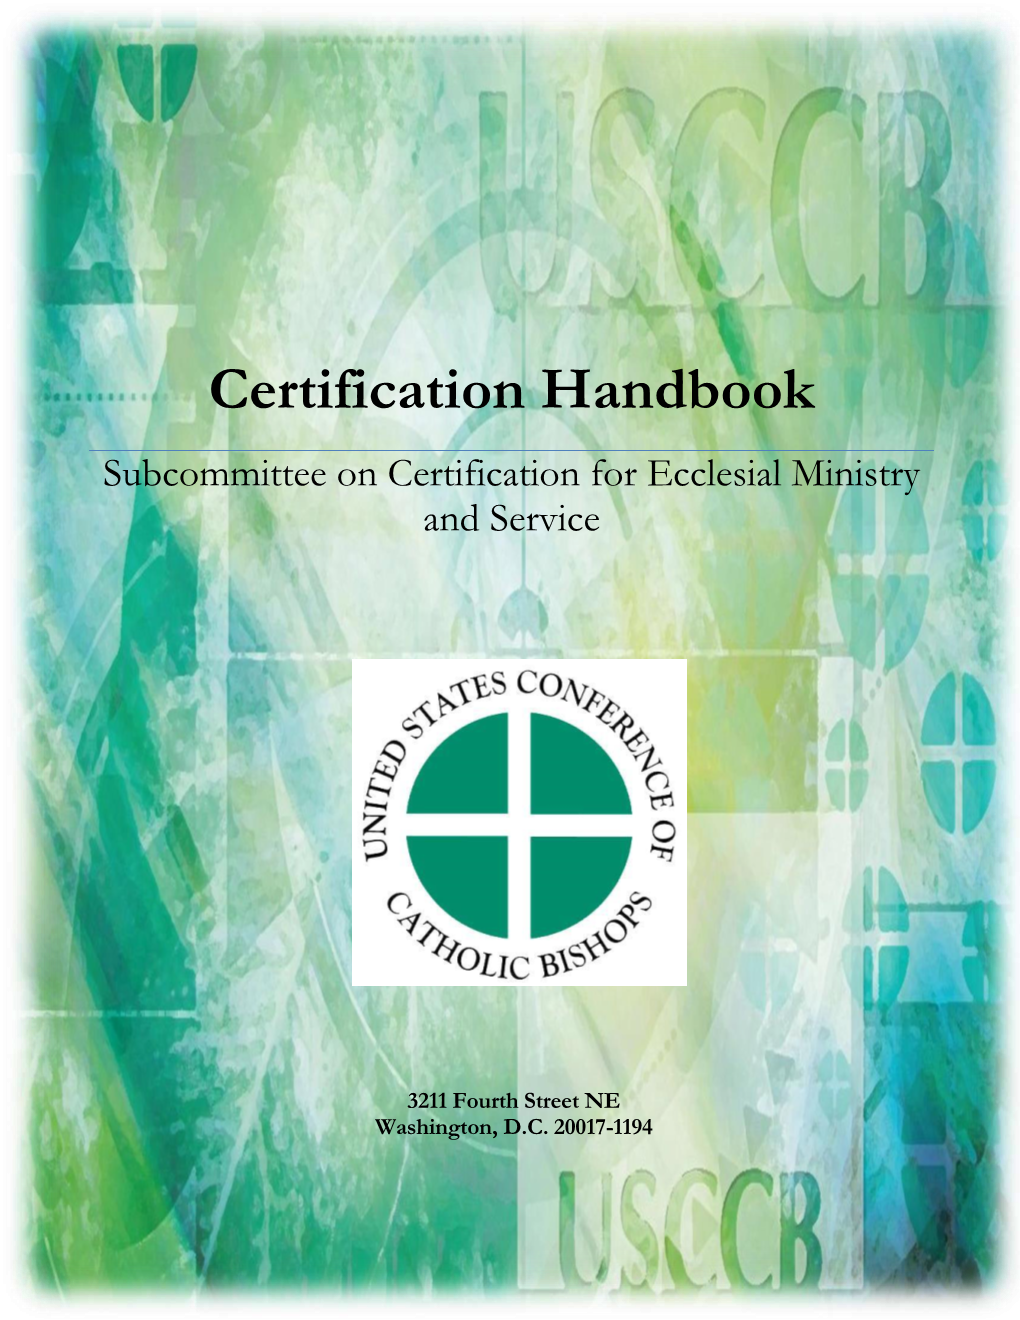 Certification Handbook Subcommittee on Certification for Ecclesial Ministry and Service